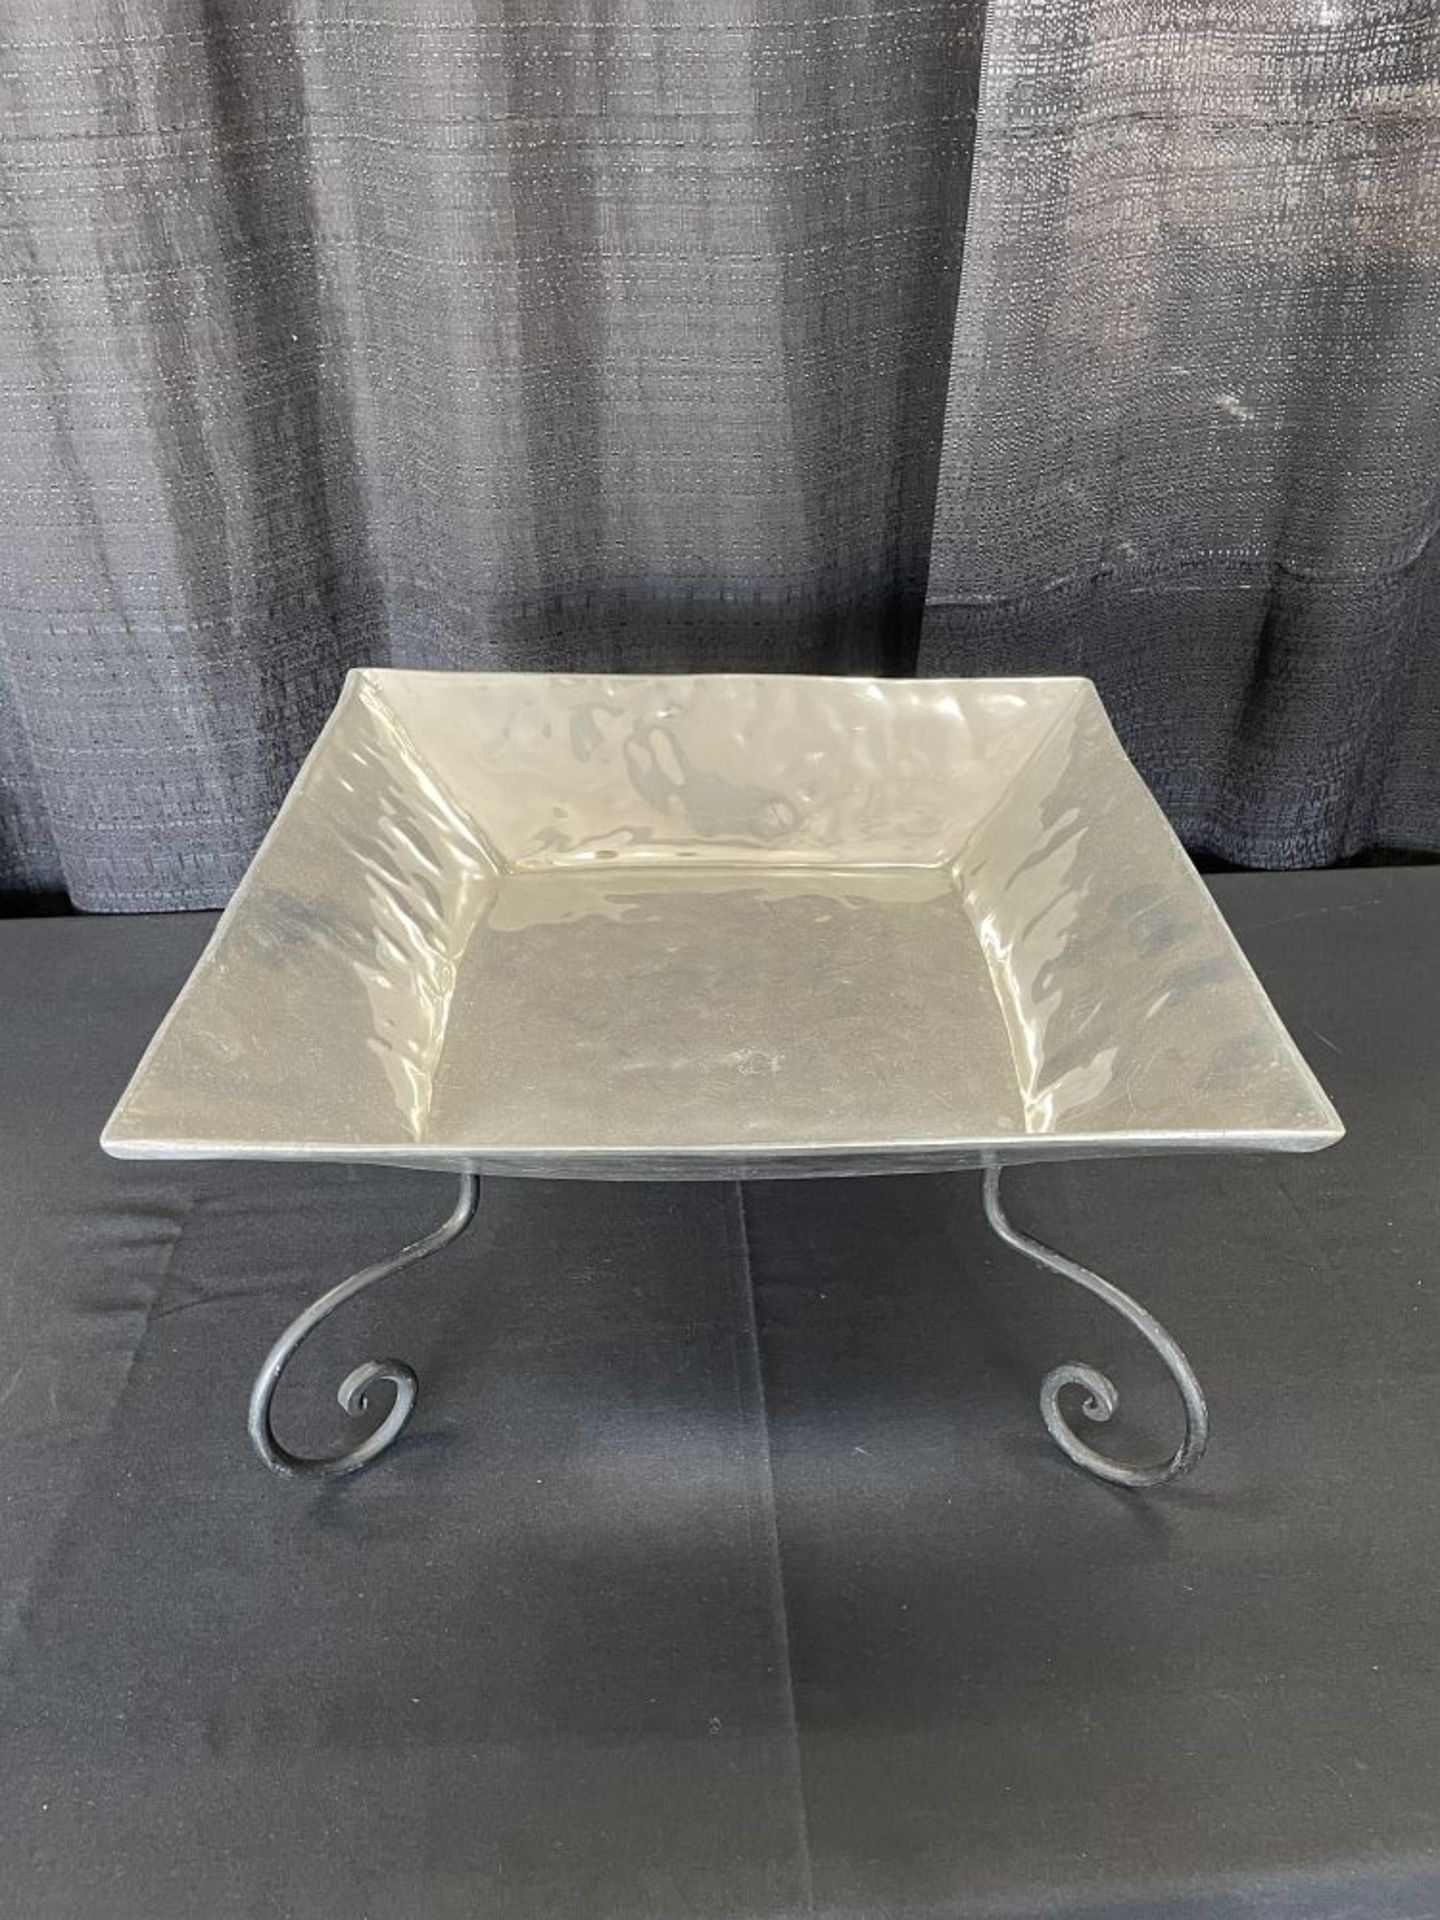 17.25" Square Metal Tray on Stand